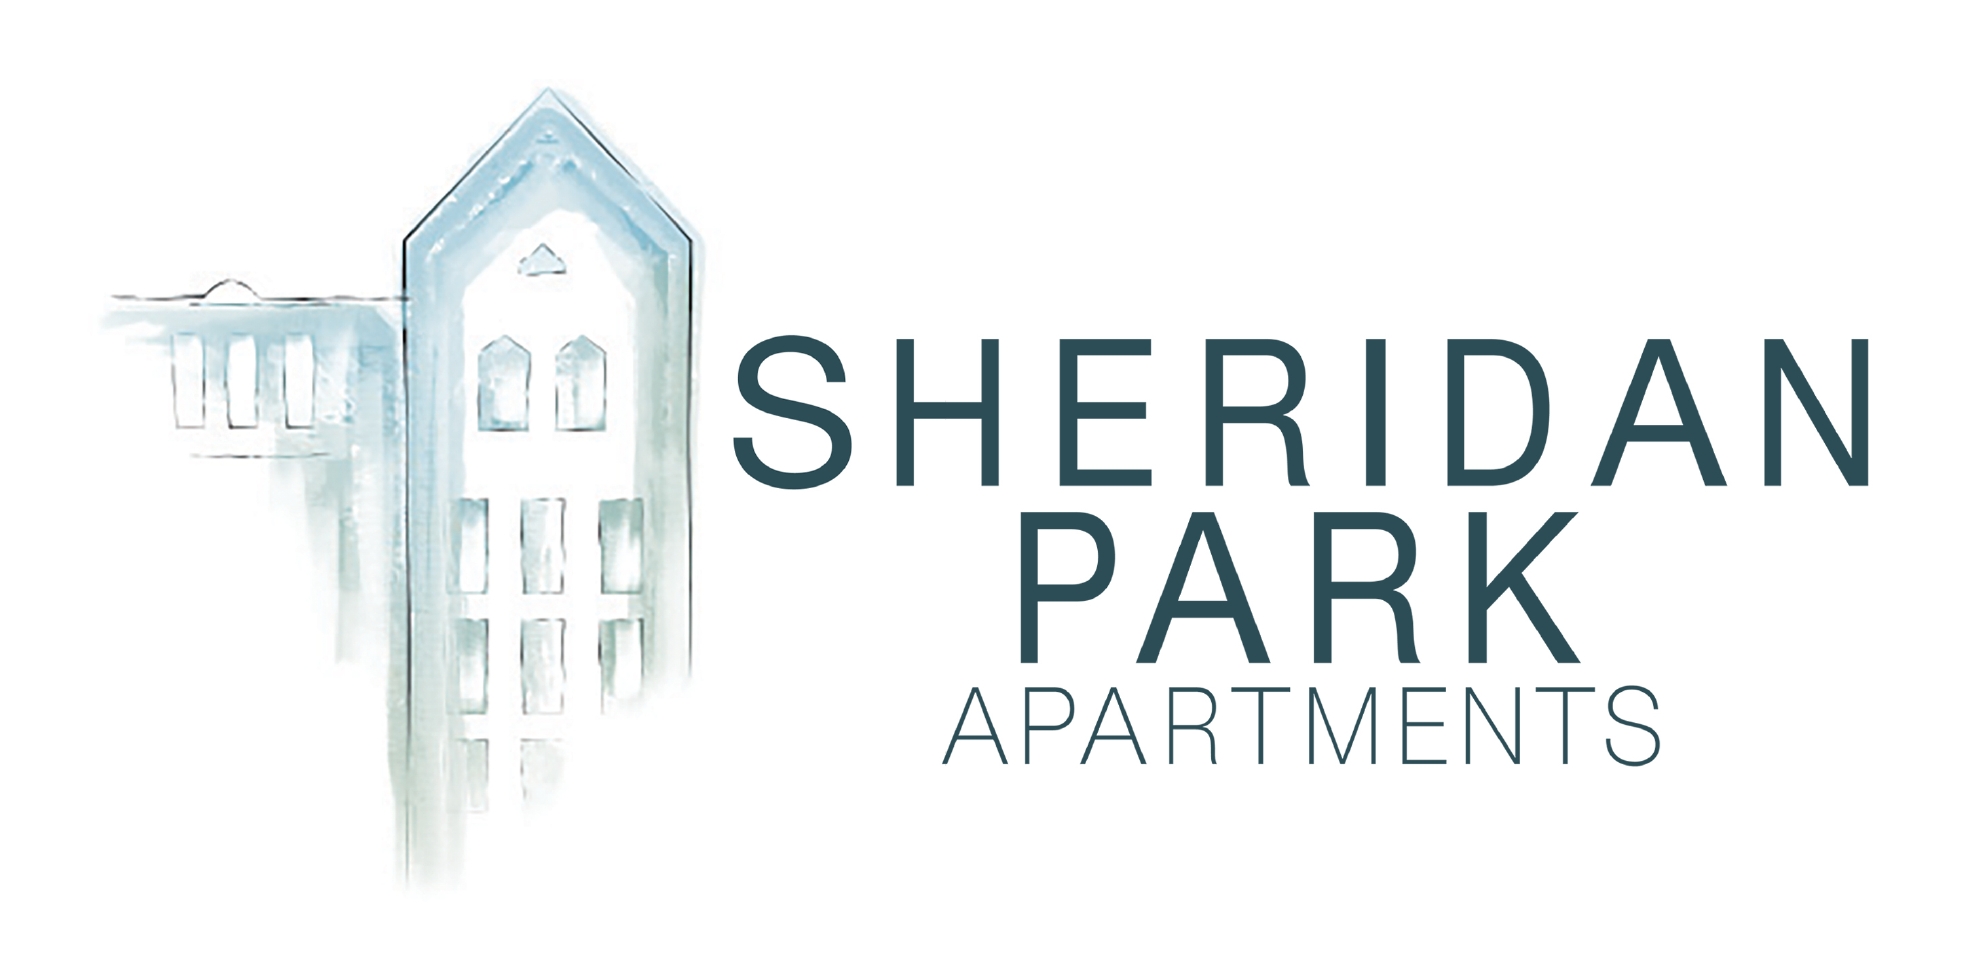 Apartment logo home house real estate Royalty Free Vector